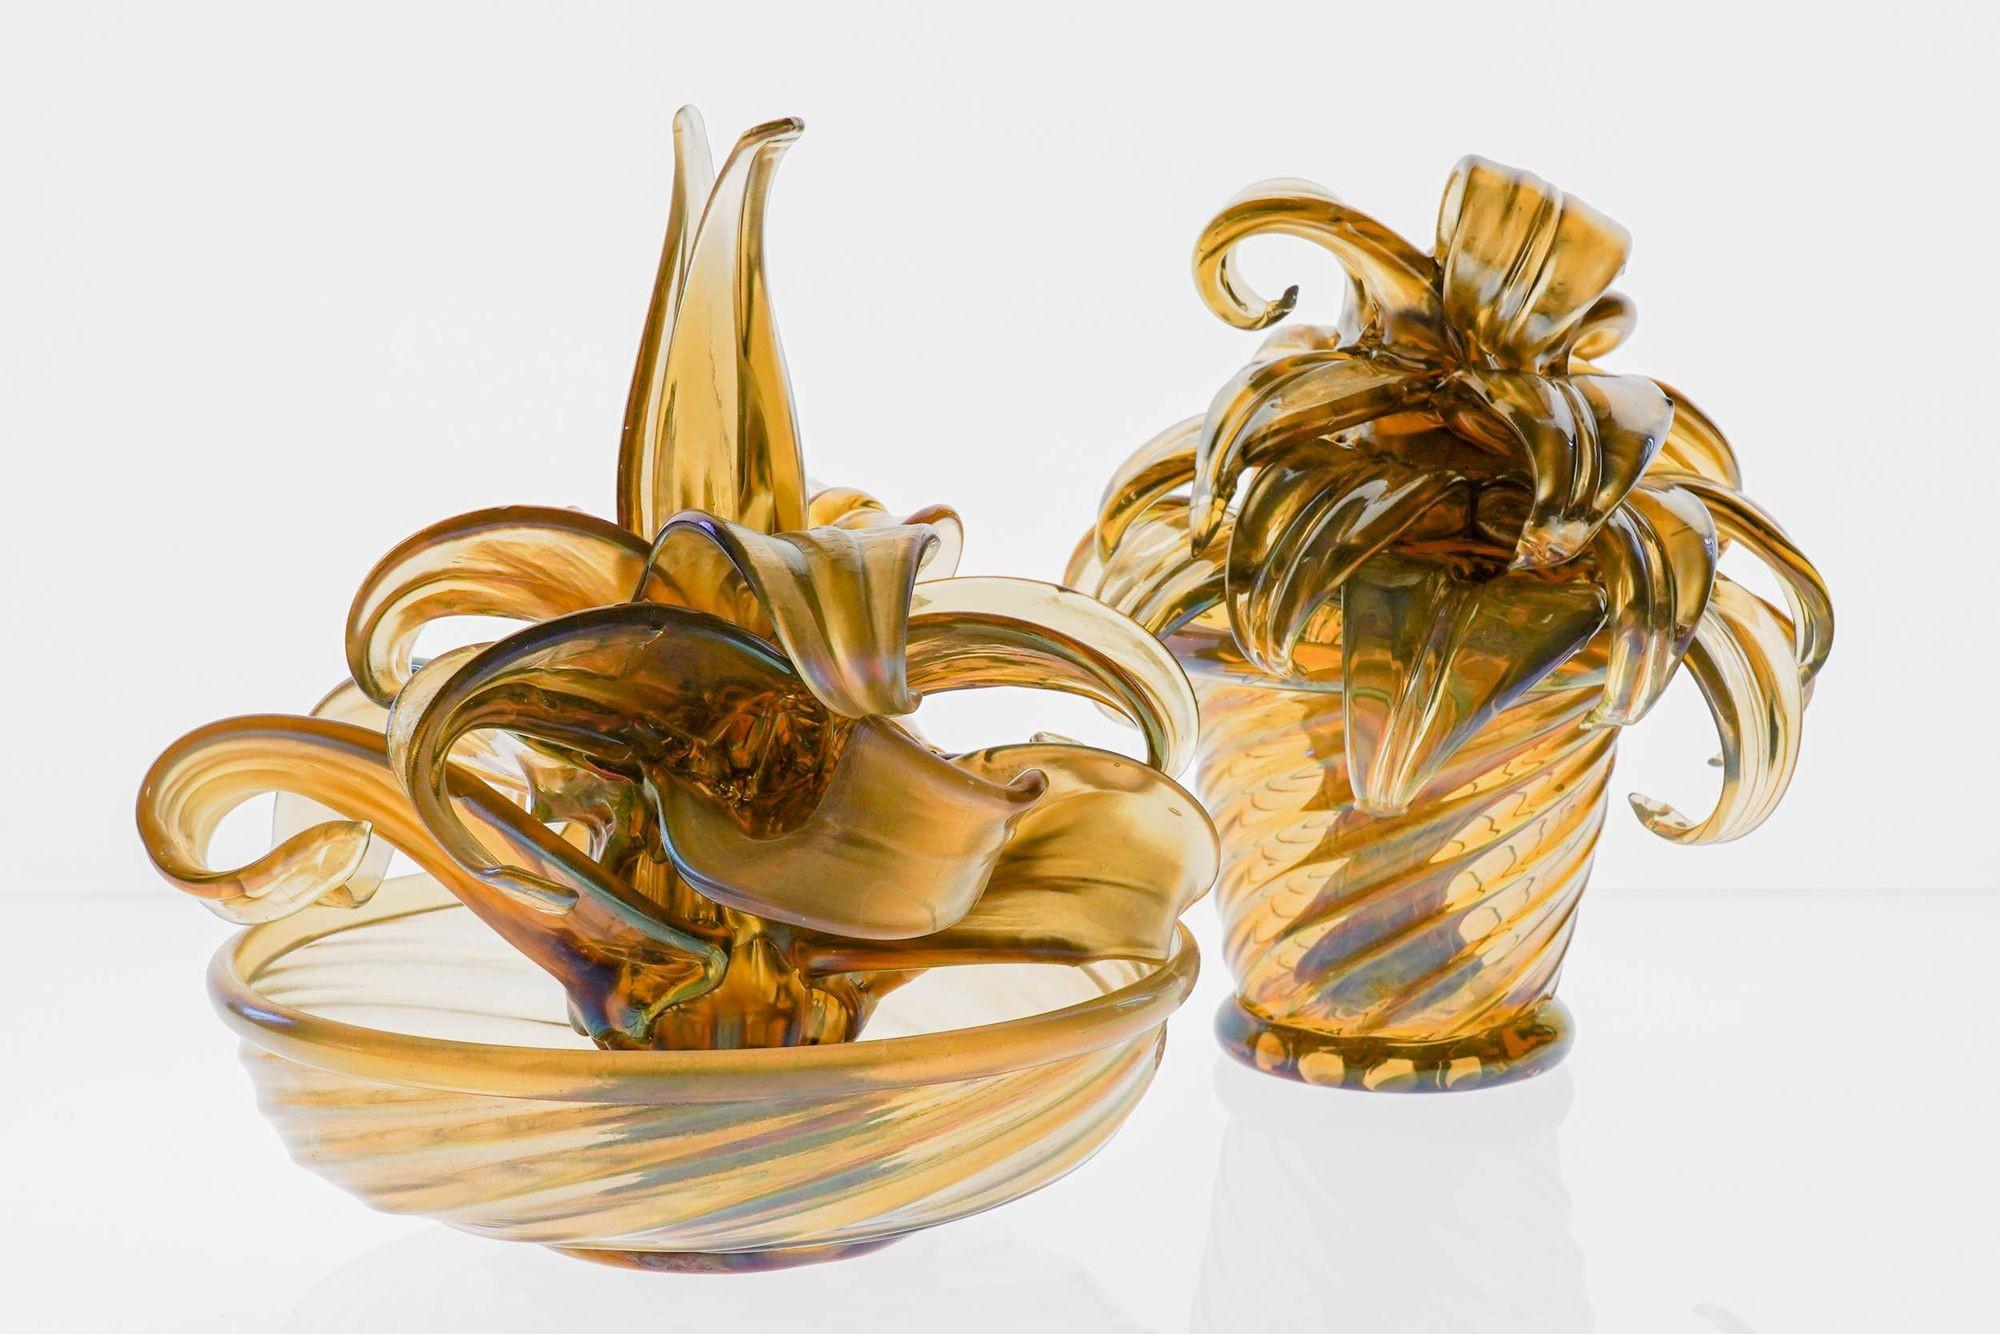 Tare pair of two glass cactus in an iridescent Fume finish. This design is a classic design by Napoleone Martinuzzi.
Update: One leaf on the large cactus snapped and was glued in place. New price reflects this.
Napoleone Martinuzzi's career included